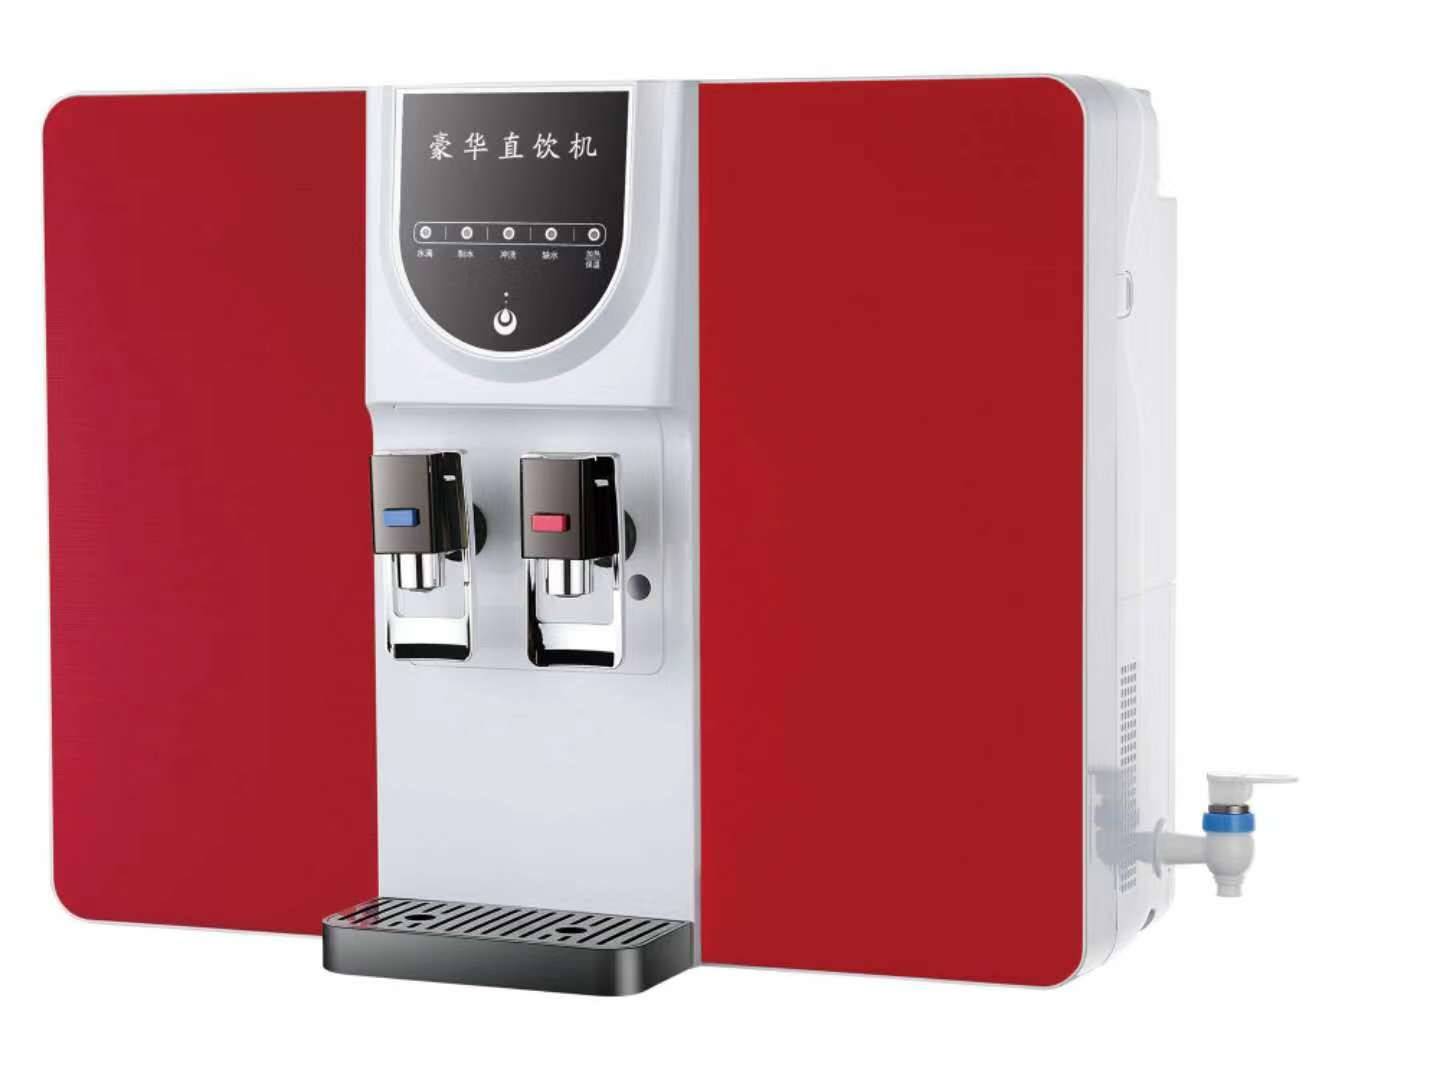 hot and cold RO water purifier with color design FQ-RH101 Featured Image